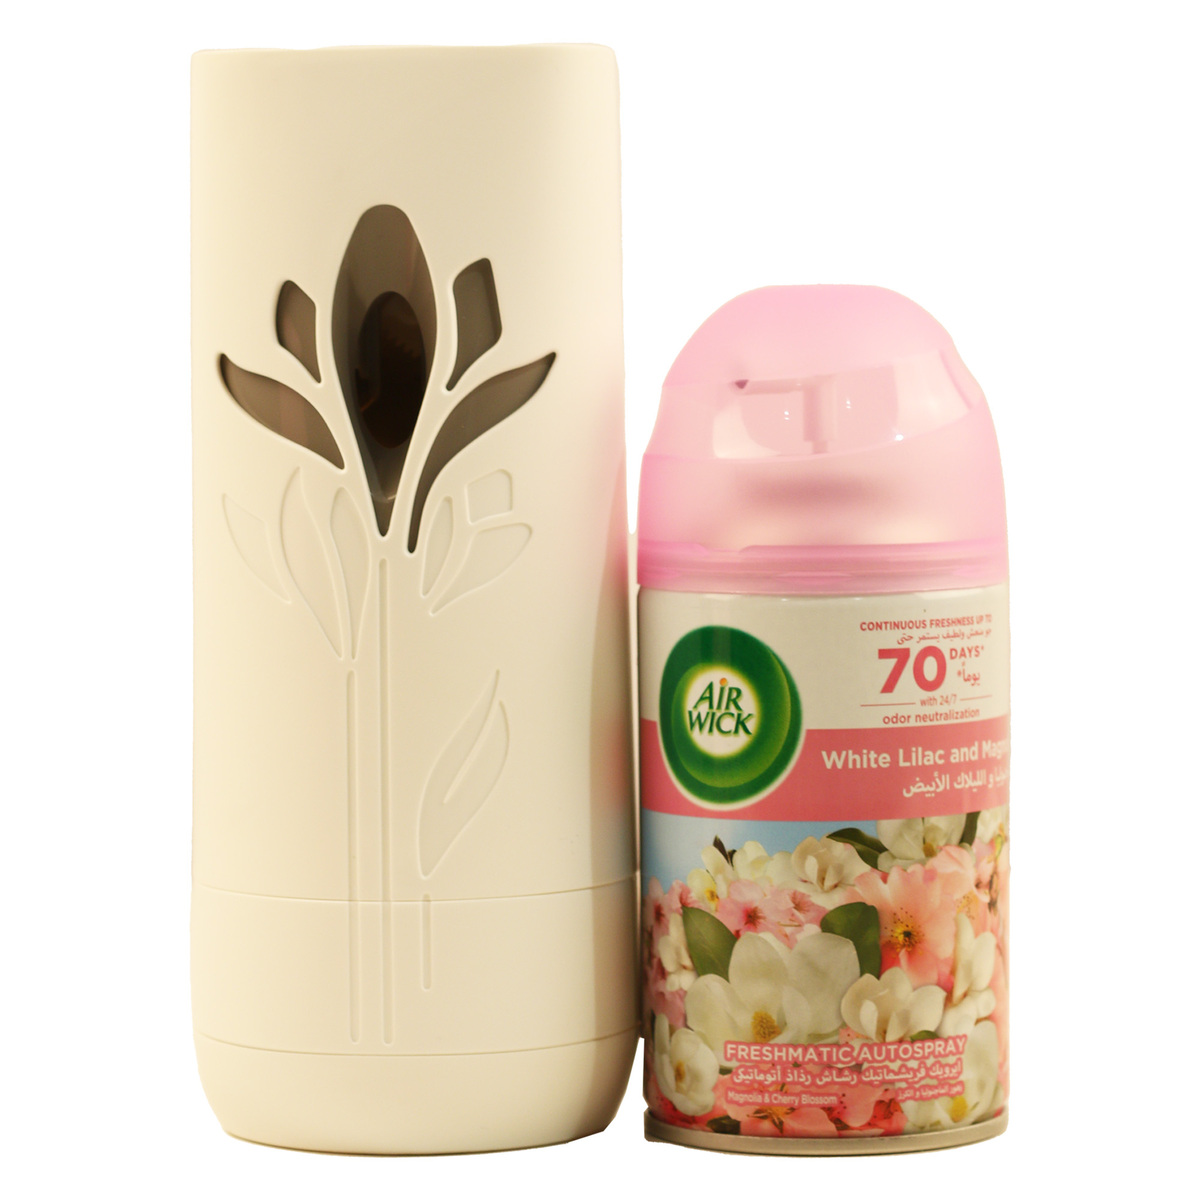 Air Wick Freshmatic Autospray With White Lilac & Magnolia Scent 250ml